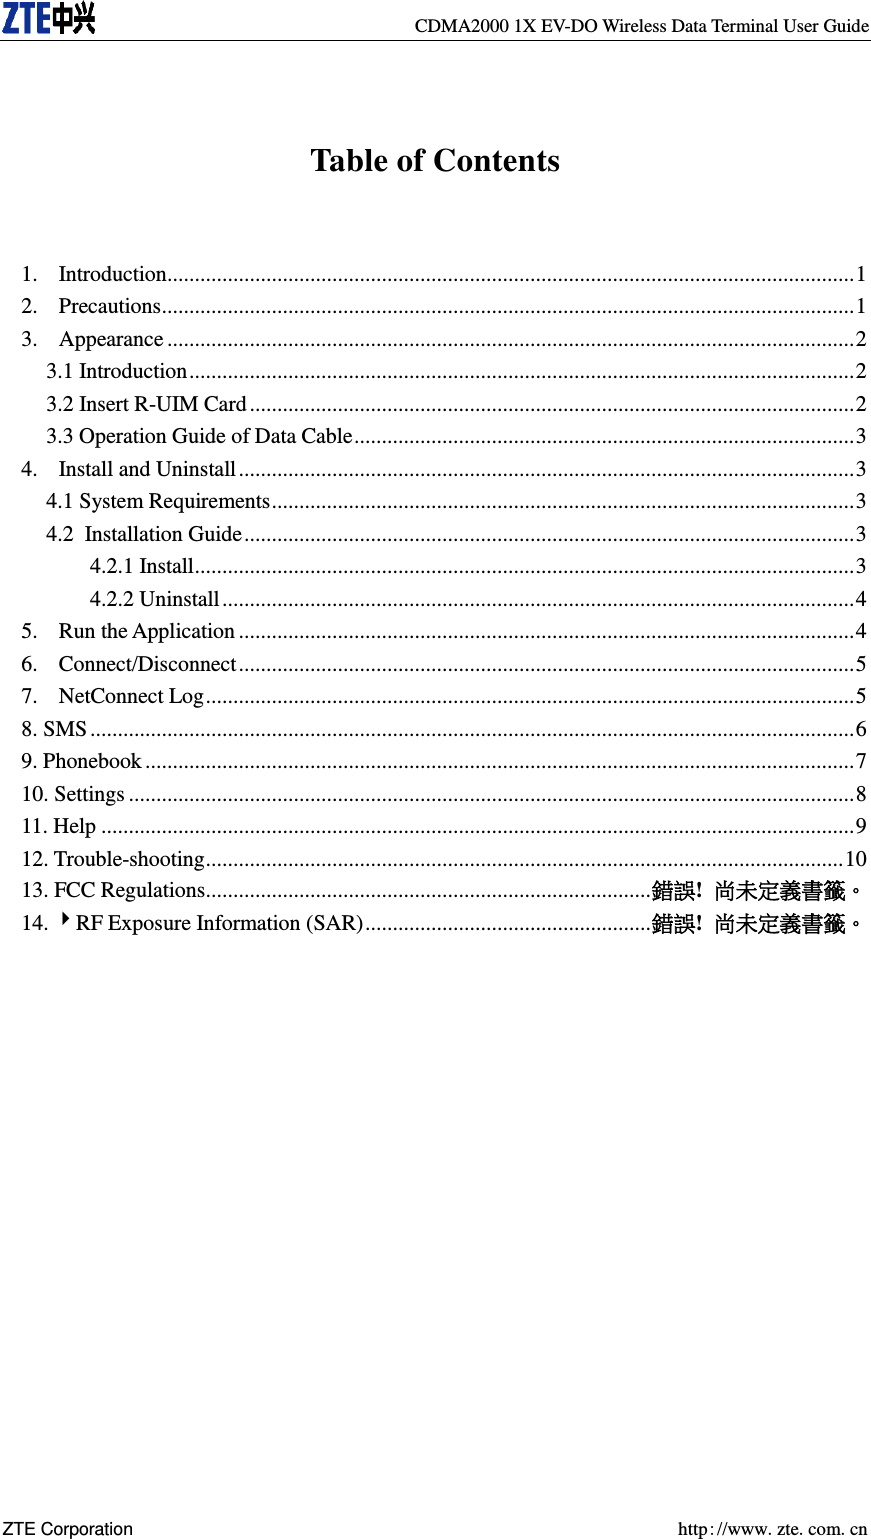   CDMA2000 1X EV-DO Wireless Data Terminal User Guide ZTE Corporation    http://www.zte.com.cn   Table of Contents  1.  Introduction............................................................................................................................. 1 2.  Precautions .............................................................................................................................. 1 3.  Appearance ............................................................................................................................. 2 3.1 Introduction ......................................................................................................................... 2 3.2 Insert R-UIM Card .............................................................................................................. 2 3.3 Operation Guide of Data Cable ........................................................................................... 3 4.  Install and Uninstall ................................................................................................................ 3 4.1 System Requirements .......................................................................................................... 3 4.2 Installation Guide ............................................................................................................... 3 4.2.1 Install ........................................................................................................................ 3 4.2.2 Uninstall ................................................................................................................... 4 5.  Run the Application ................................................................................................................ 4 6.  Connect/Disconnect ................................................................................................................ 5 7.  NetConnect Log ...................................................................................................................... 5 8. SMS ........................................................................................................................................... 6 9. Phonebook ................................................................................................................................. 7 10. Settings .................................................................................................................................... 8 11. Help ......................................................................................................................................... 9 12. Trouble-shooting .................................................................................................................... 10 13. FCC Regulations................................................................................. 錯誤!  尚未定義書籤。 14. RF Exposure Information (SAR) .................................................... 錯誤!  尚未定義書籤。  